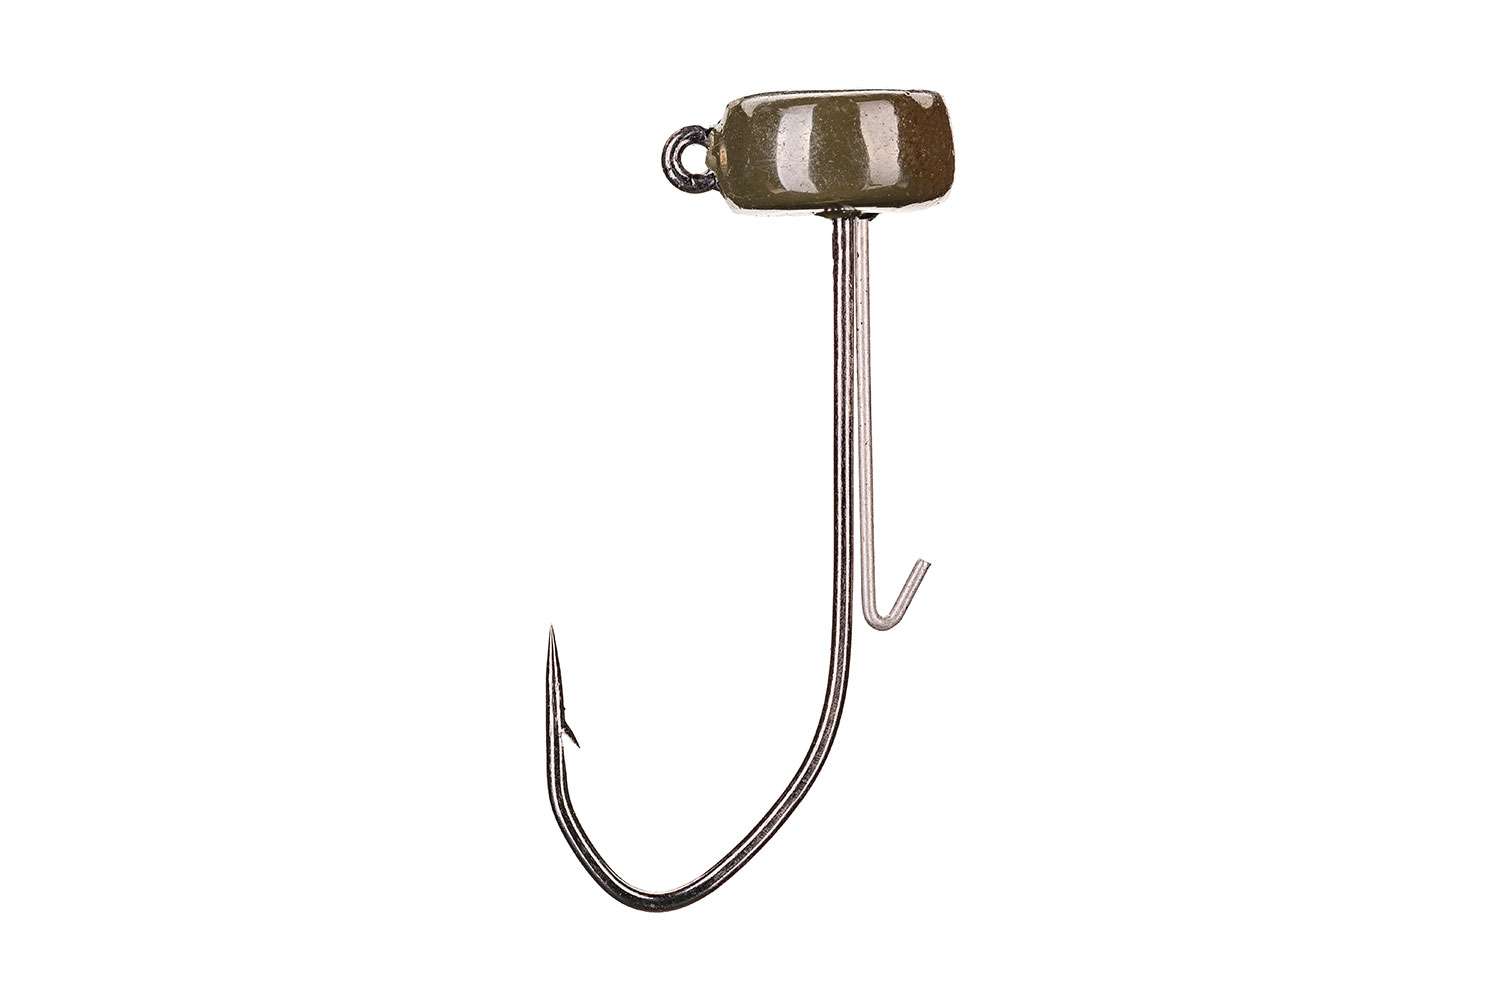     <B>Strike King Tour Grade Ned Head </B><BR>
The Ned Jig Head comes with the perfect light wire No. 2 sickle style hook and bait keeper from Eagle Claw, so thereâs no doubt that hook ups will be on point. The new jighead comes in 1/16-, 3/16- and 1/8-ounce sizes in both green pumpkin and black. Thereâs s plenty of room in any anglerâs tackle box for a few.
<BR>
<B>MSRP: $4.99</B>
